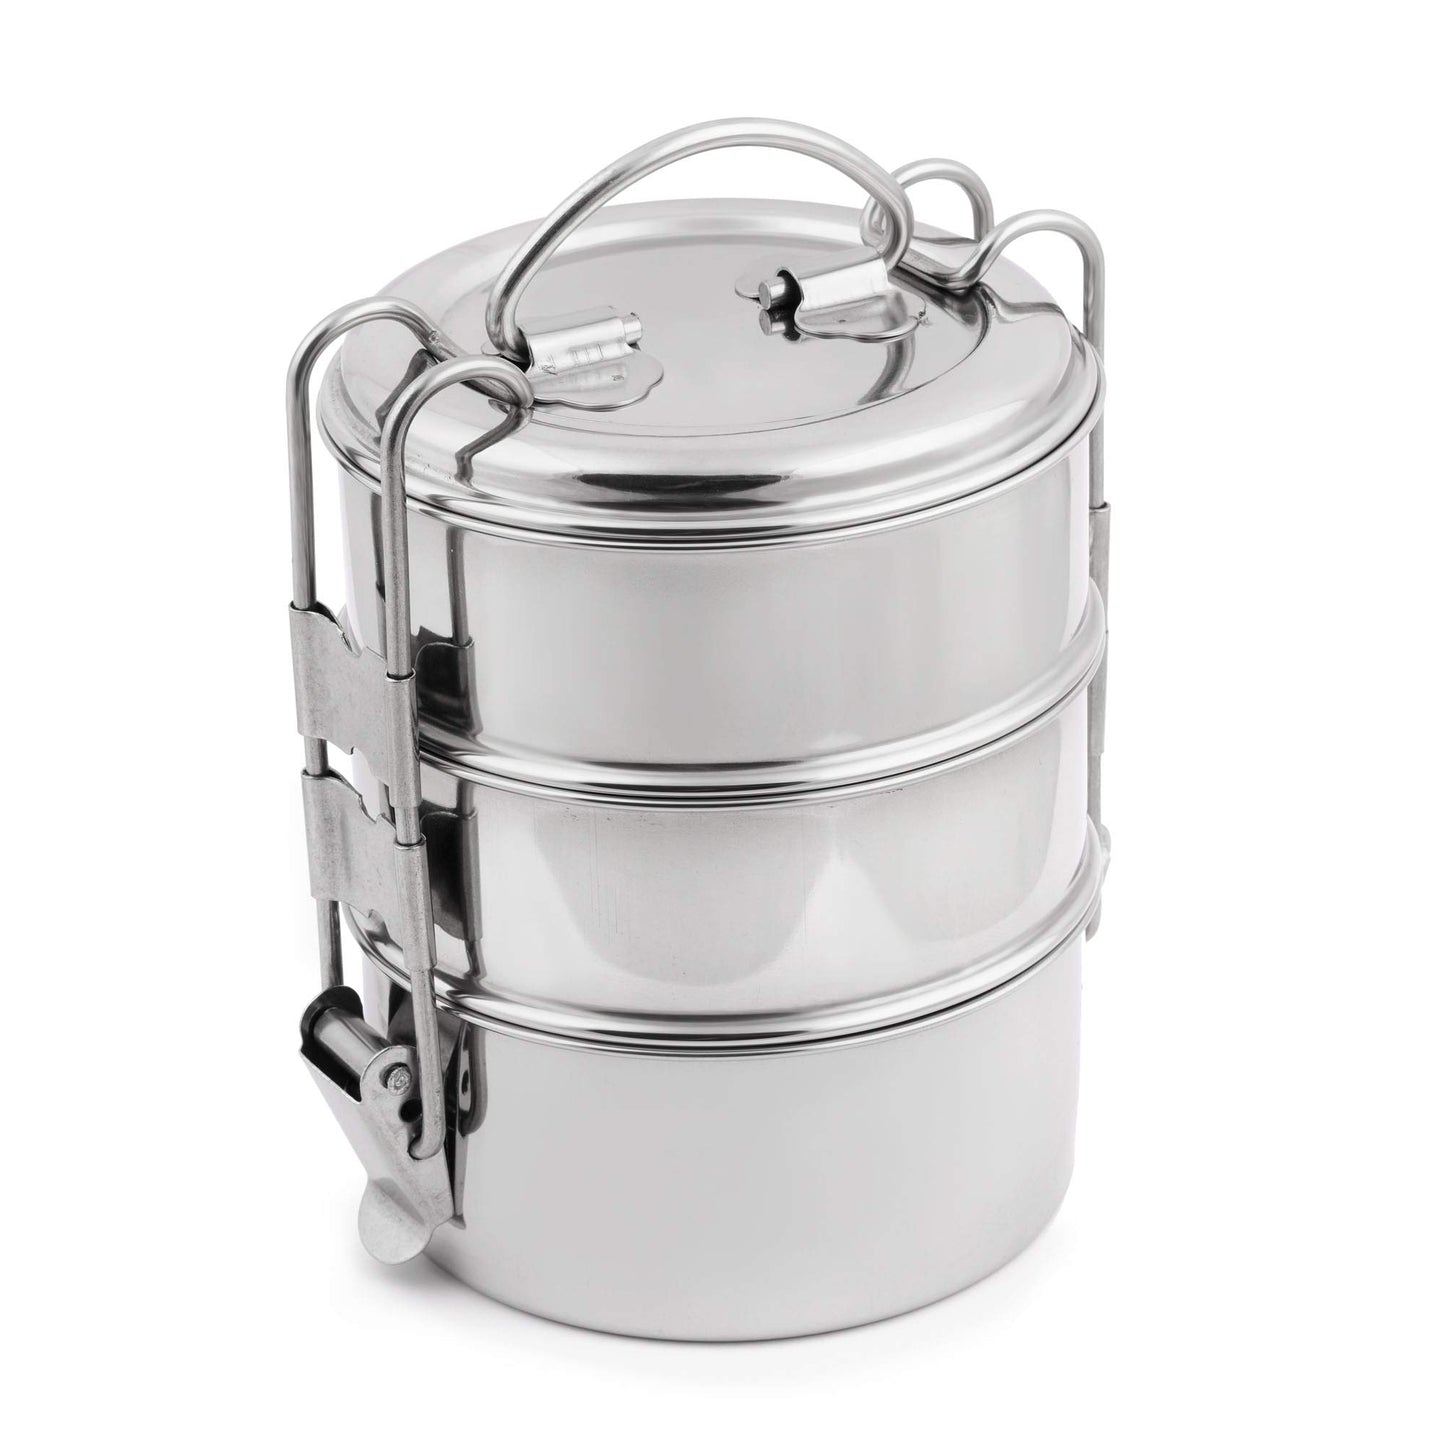 Stainless Steel 3 Tier Jeniffer Lunch Box with Insulated Bag-10 cm